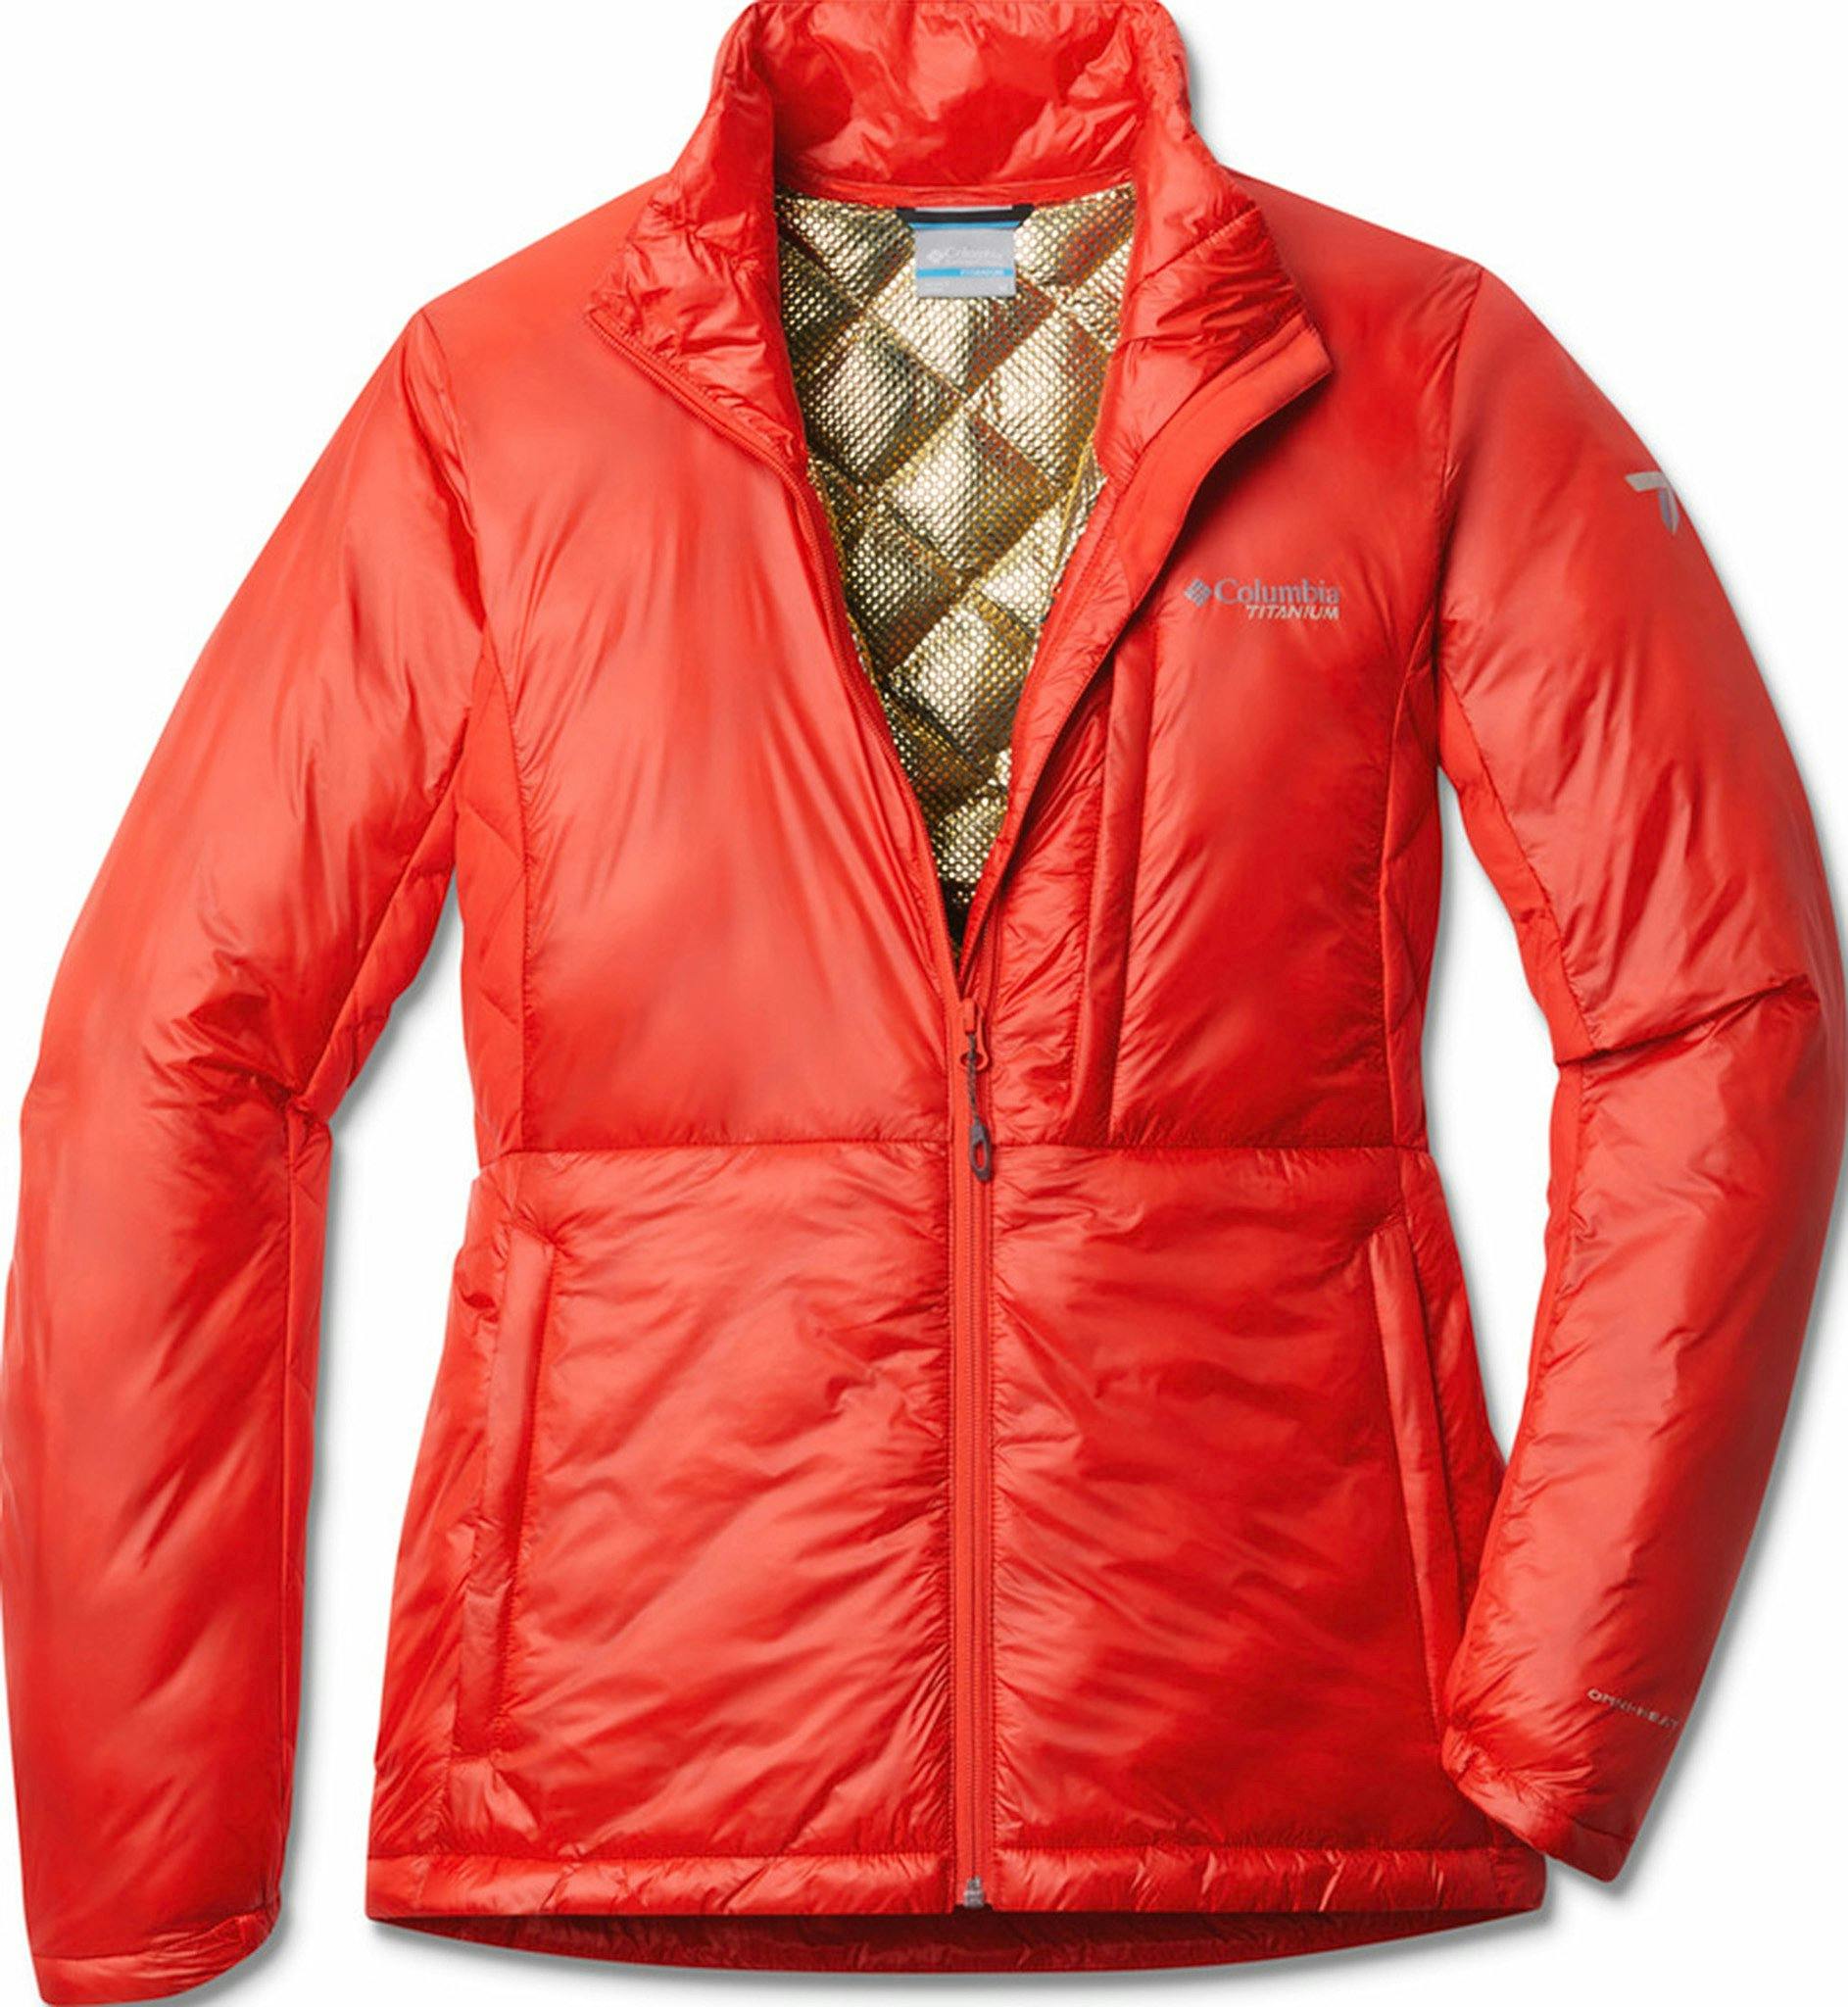 Product image for Titan Pass Double Wall Hybrid Jacket - Women's